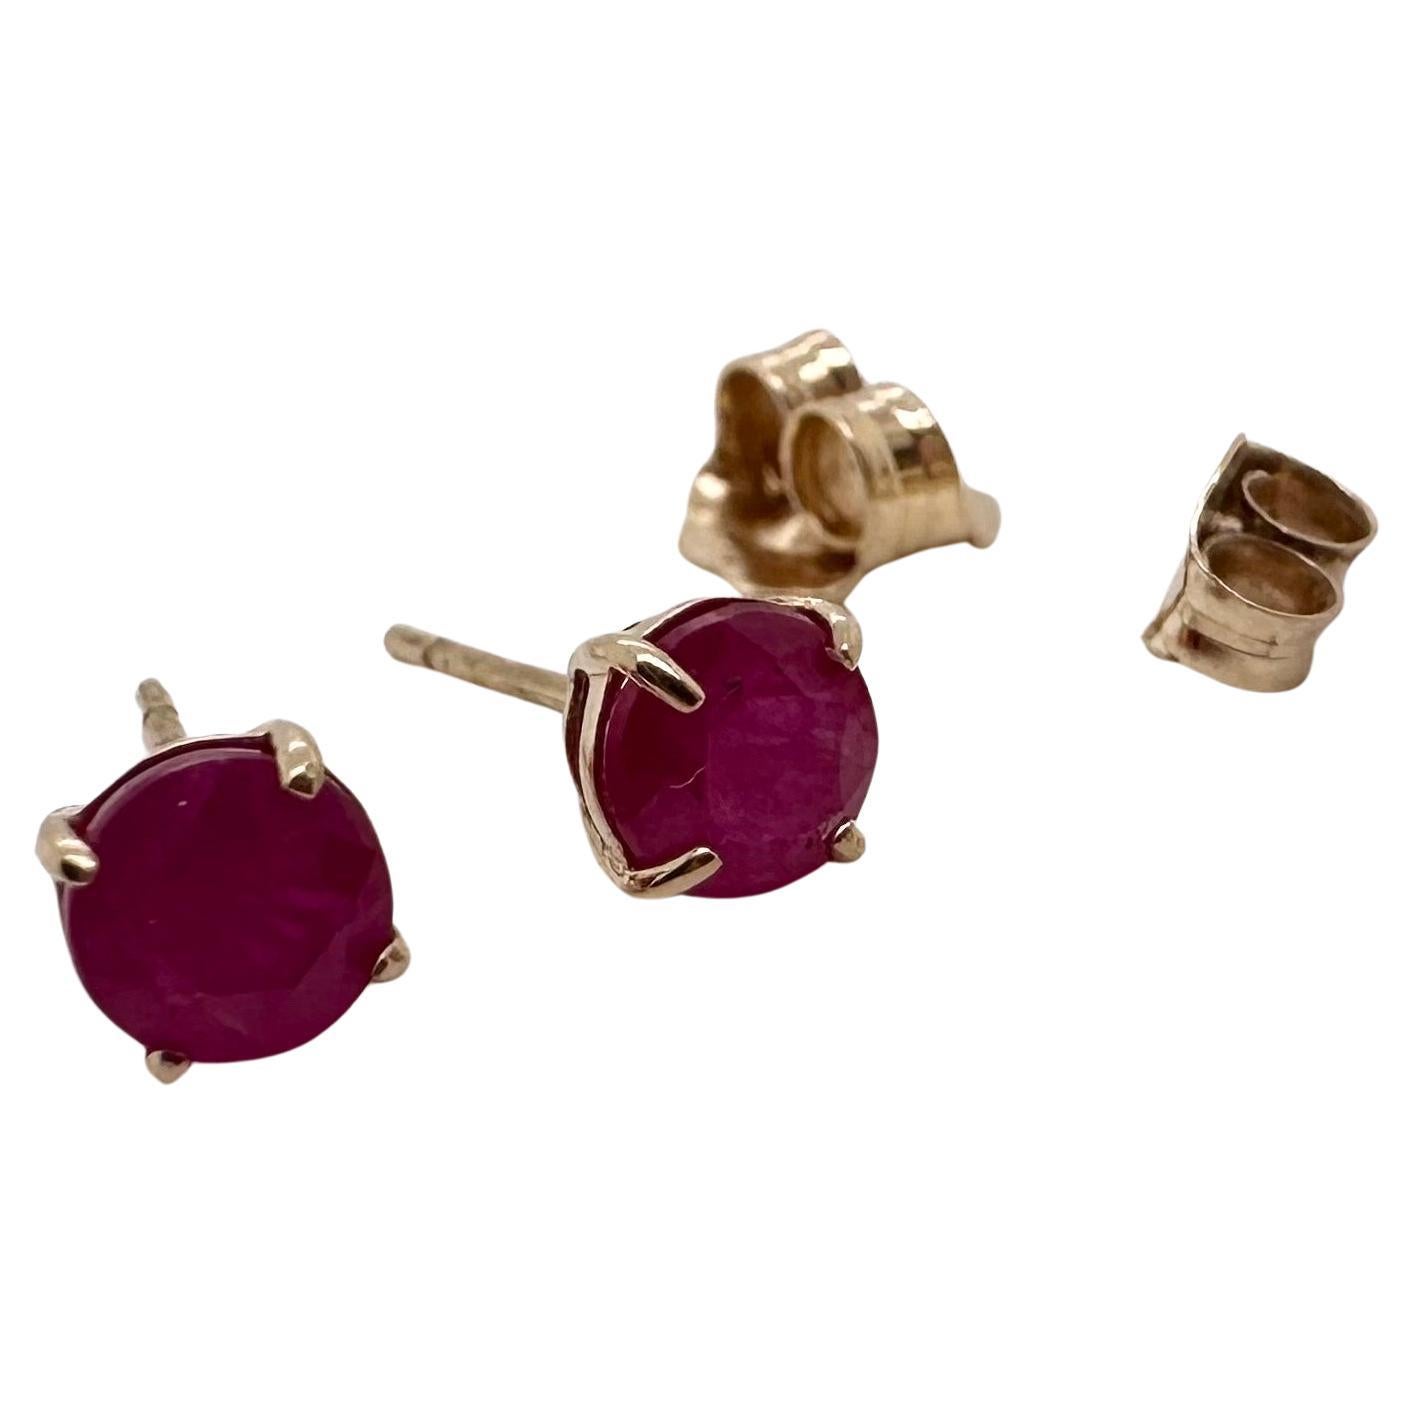 5mm ruby studs 14 karat yellow gold studs natural ruby earrings For Sale